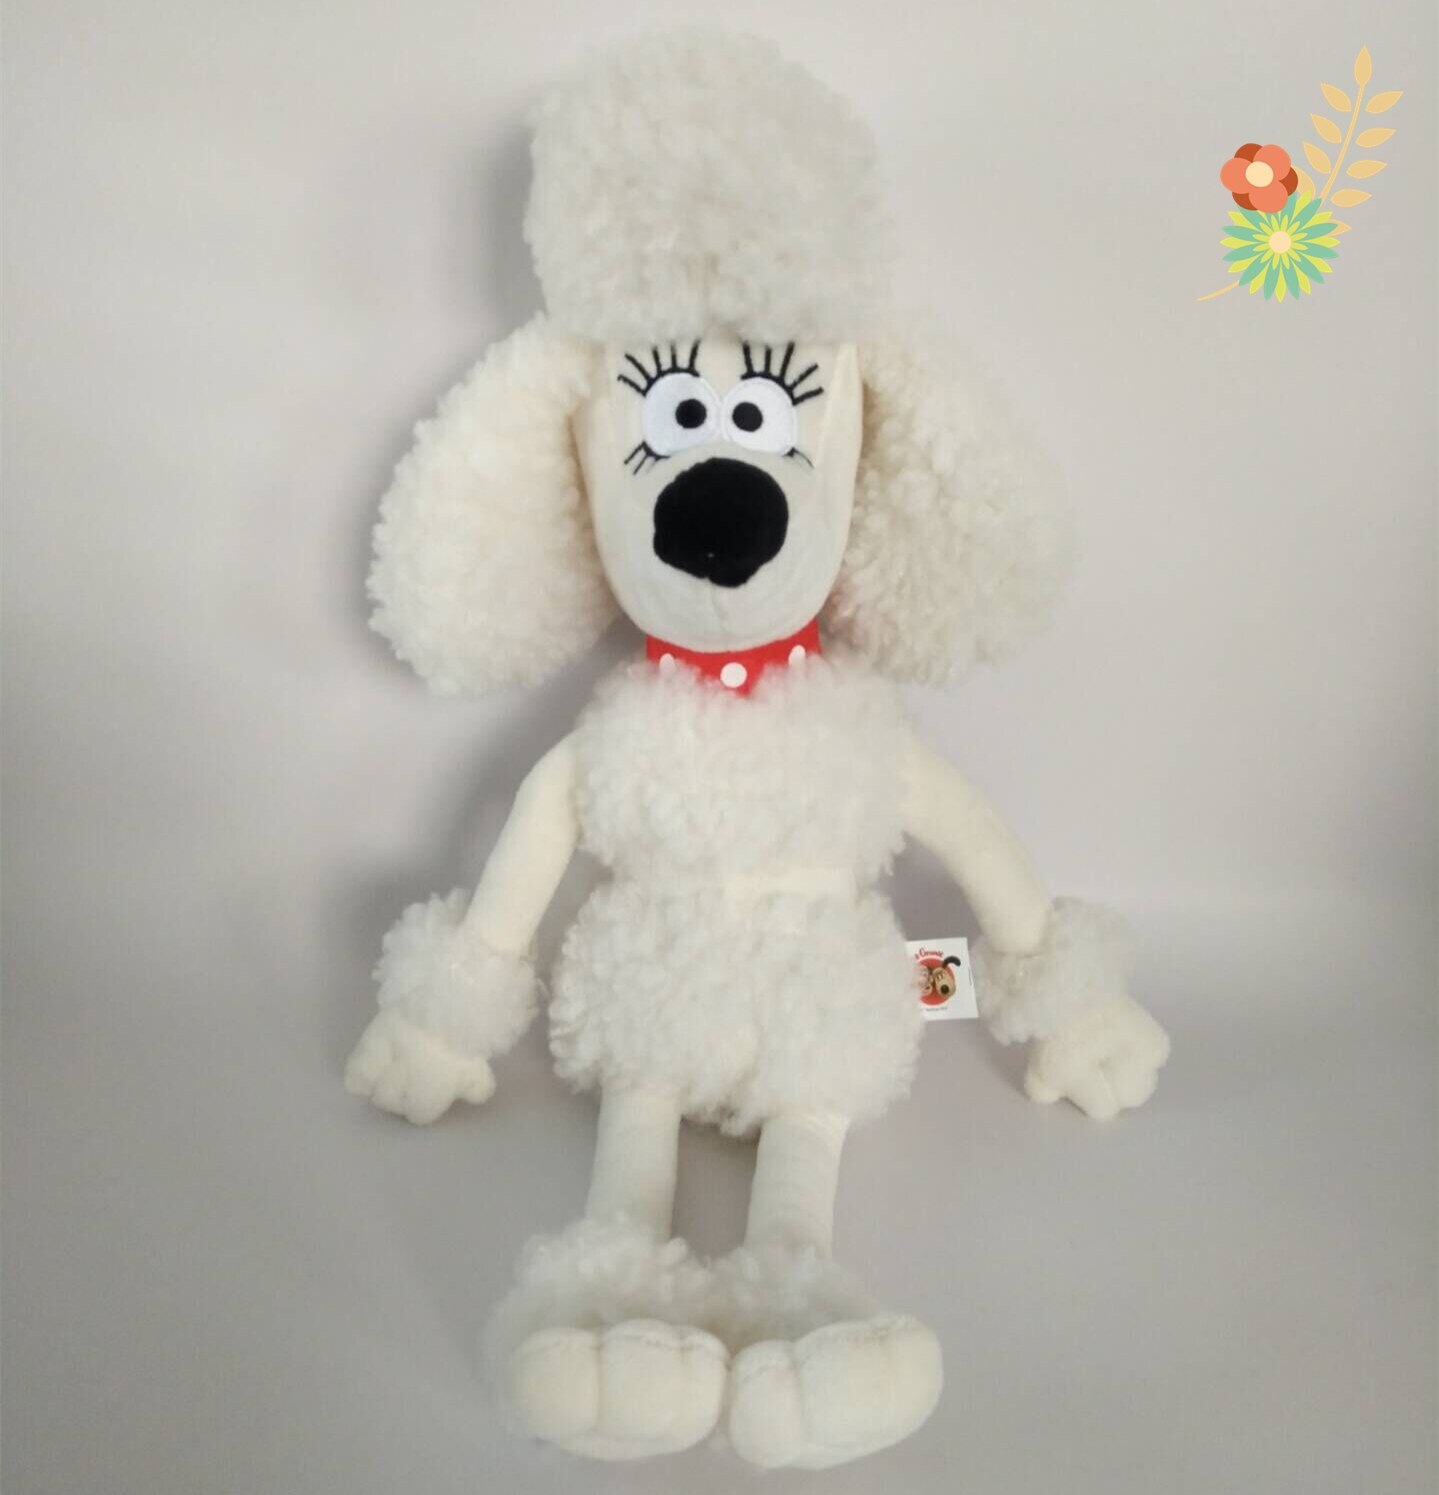 New Wallances Gromit Cute Love Section Fluffles Kawaii Anime Figure Poodle Plush Toys for Kids Doll Boy Girl Baby Gift